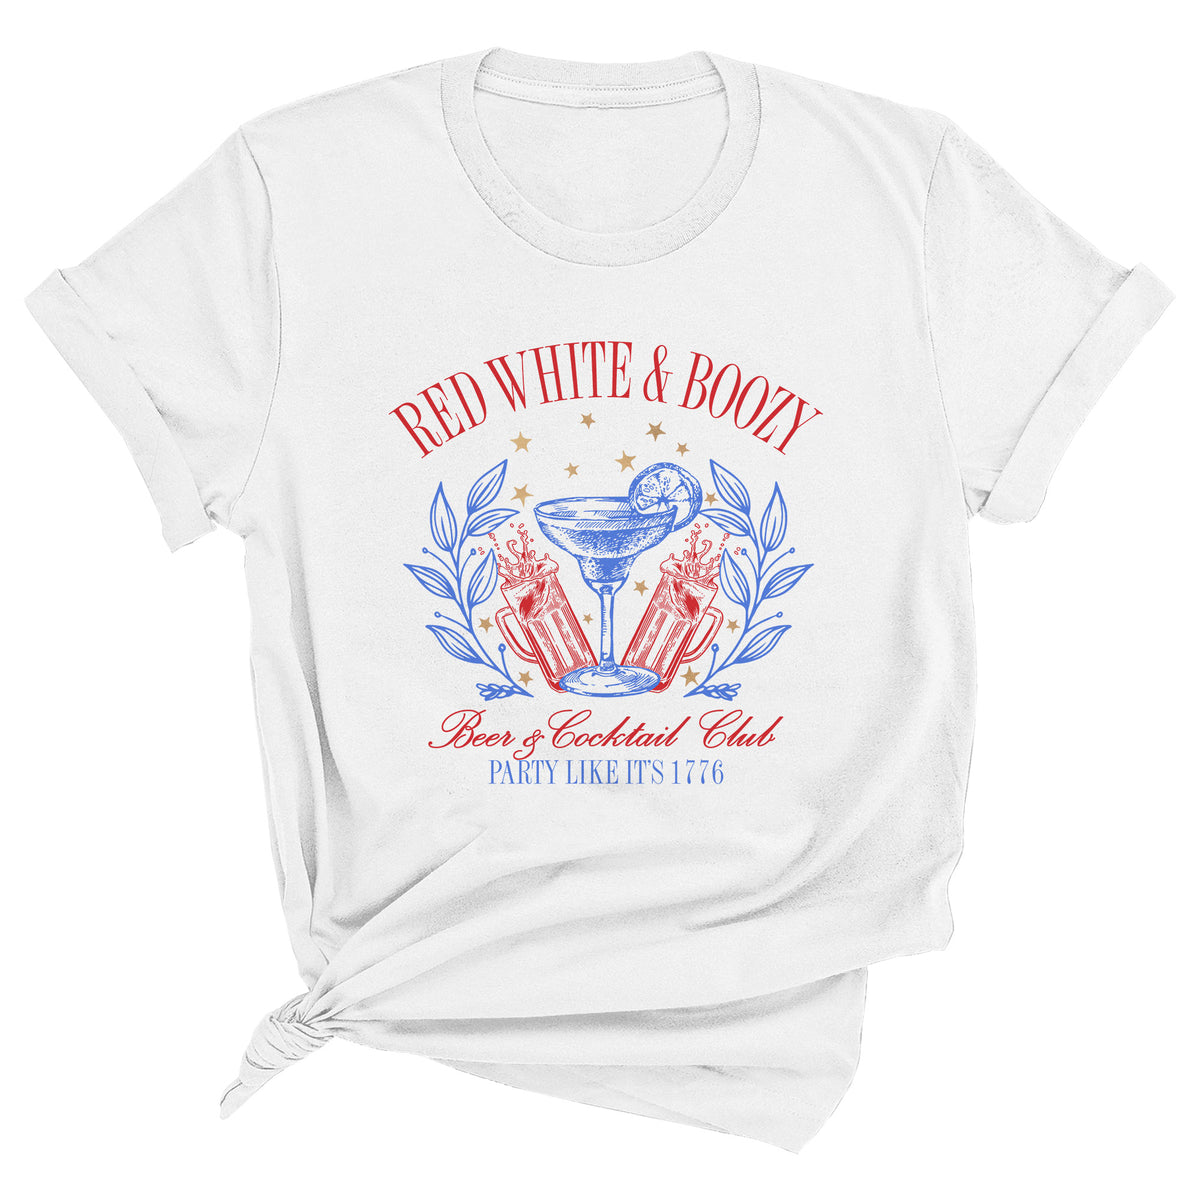 Red White & Boozy, Beer & Cocktail Club Unisex T-Shirt